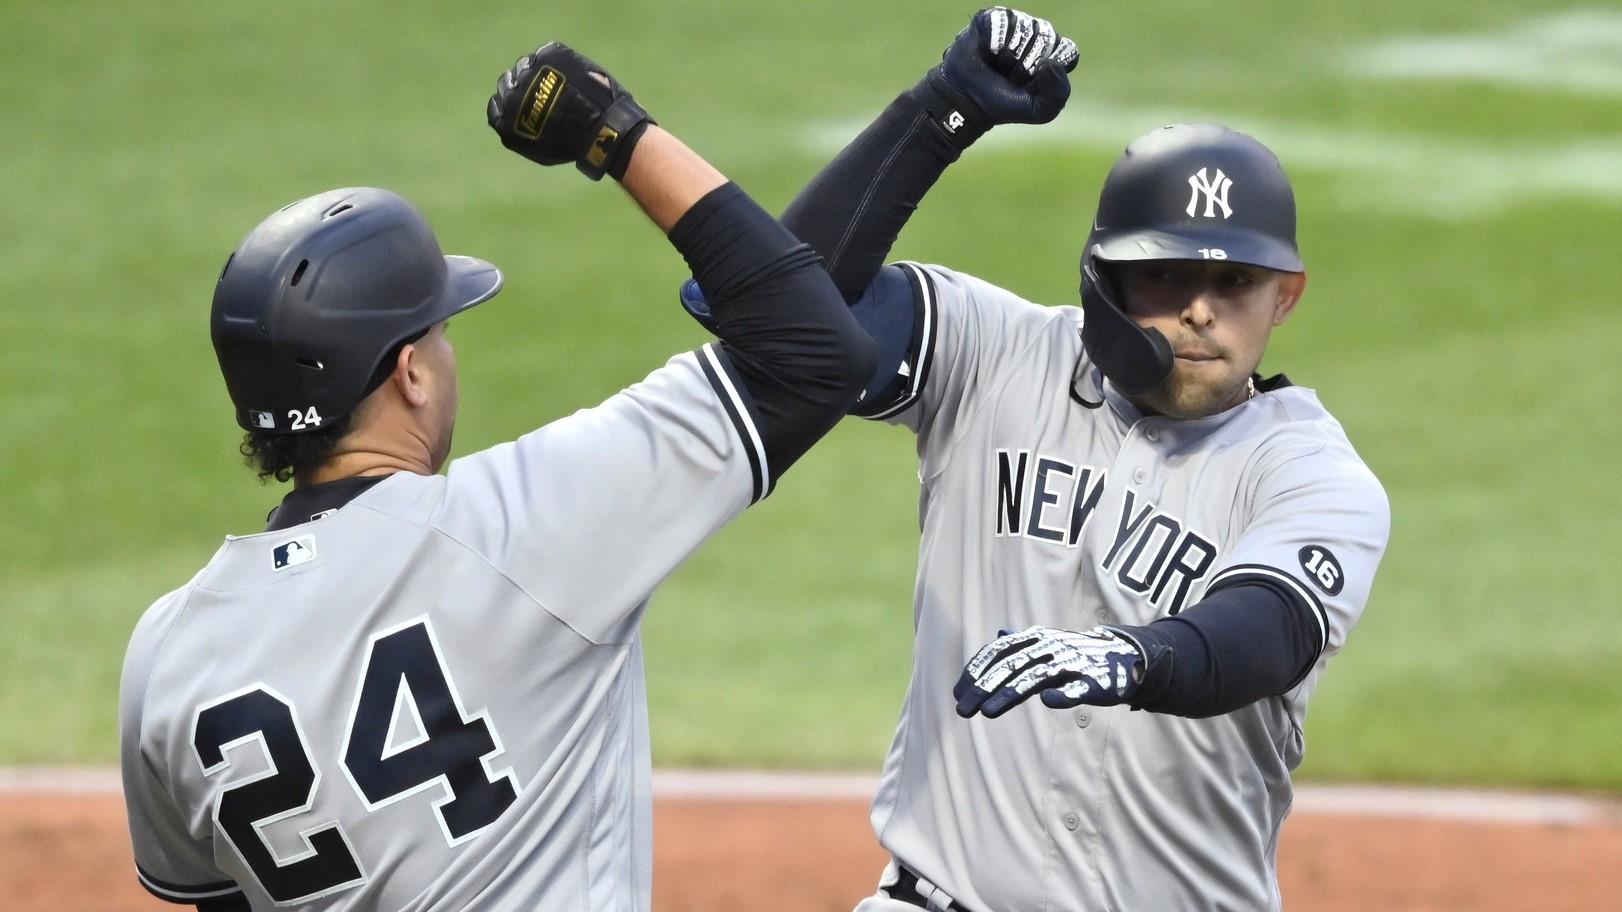 Apr 23, 2021; Cleveland, Ohio, USA; New York Yankees second baseman Rougned Odor (R) celebrates his two-run home run with catcher Gary Sanchez (24) during the second inning against the Cleveland Indians at Progressive Field. / David Richard-USA TODAY Sports